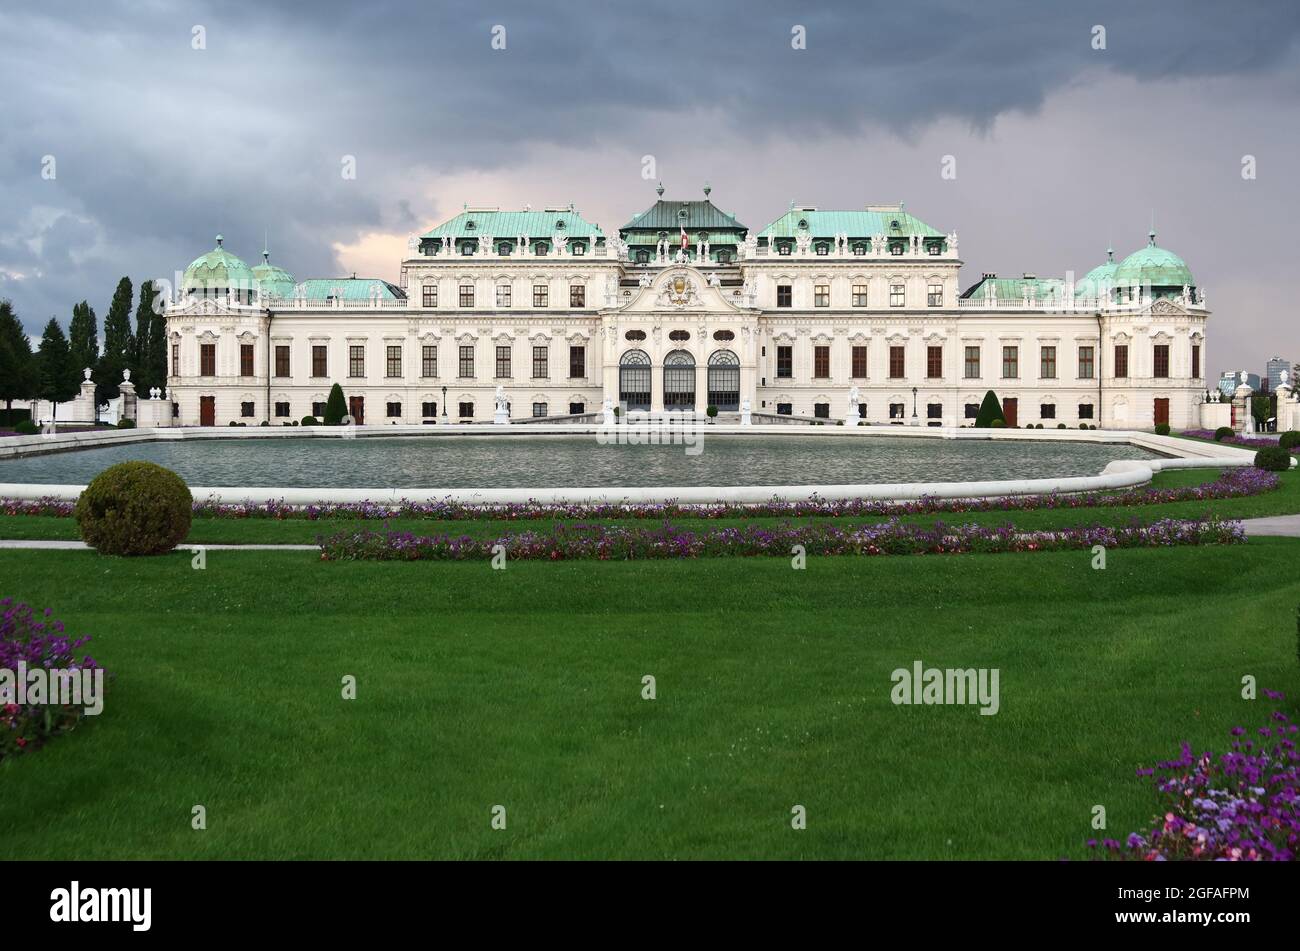 Belvedere Palace on a cloudy and rainy summer evening Stock Photo